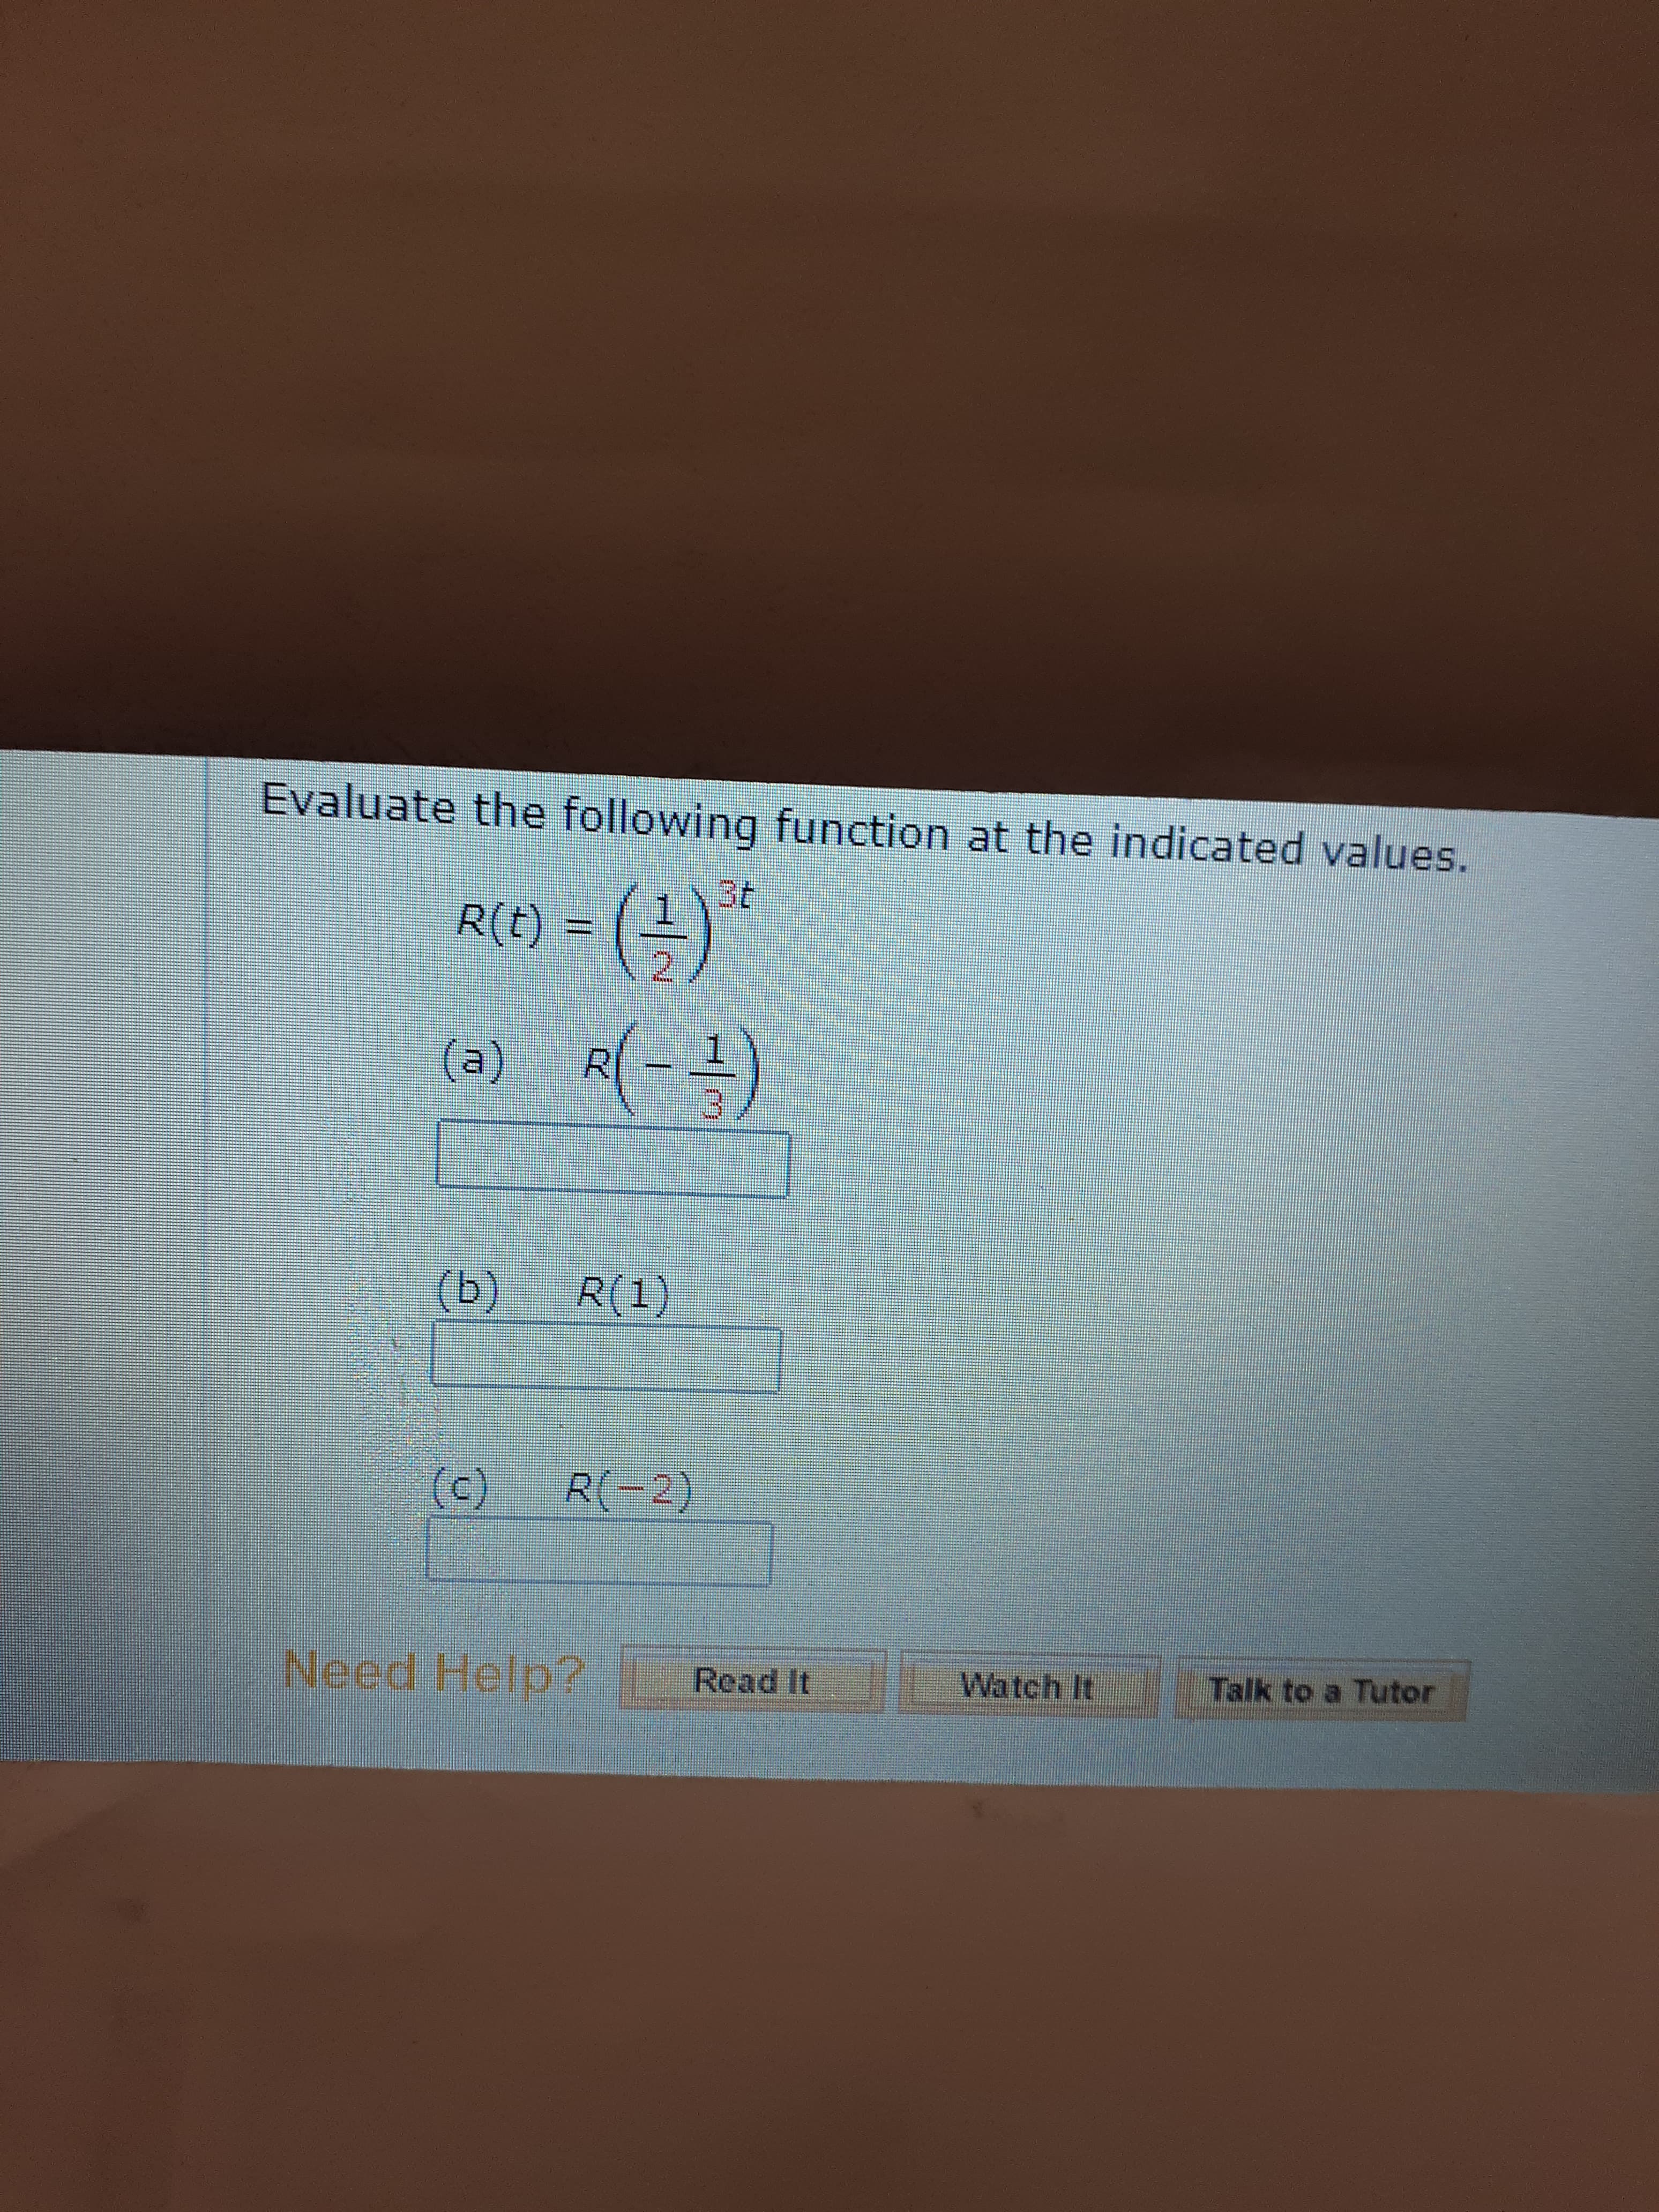 Evaluate the following function at the indicated values.
